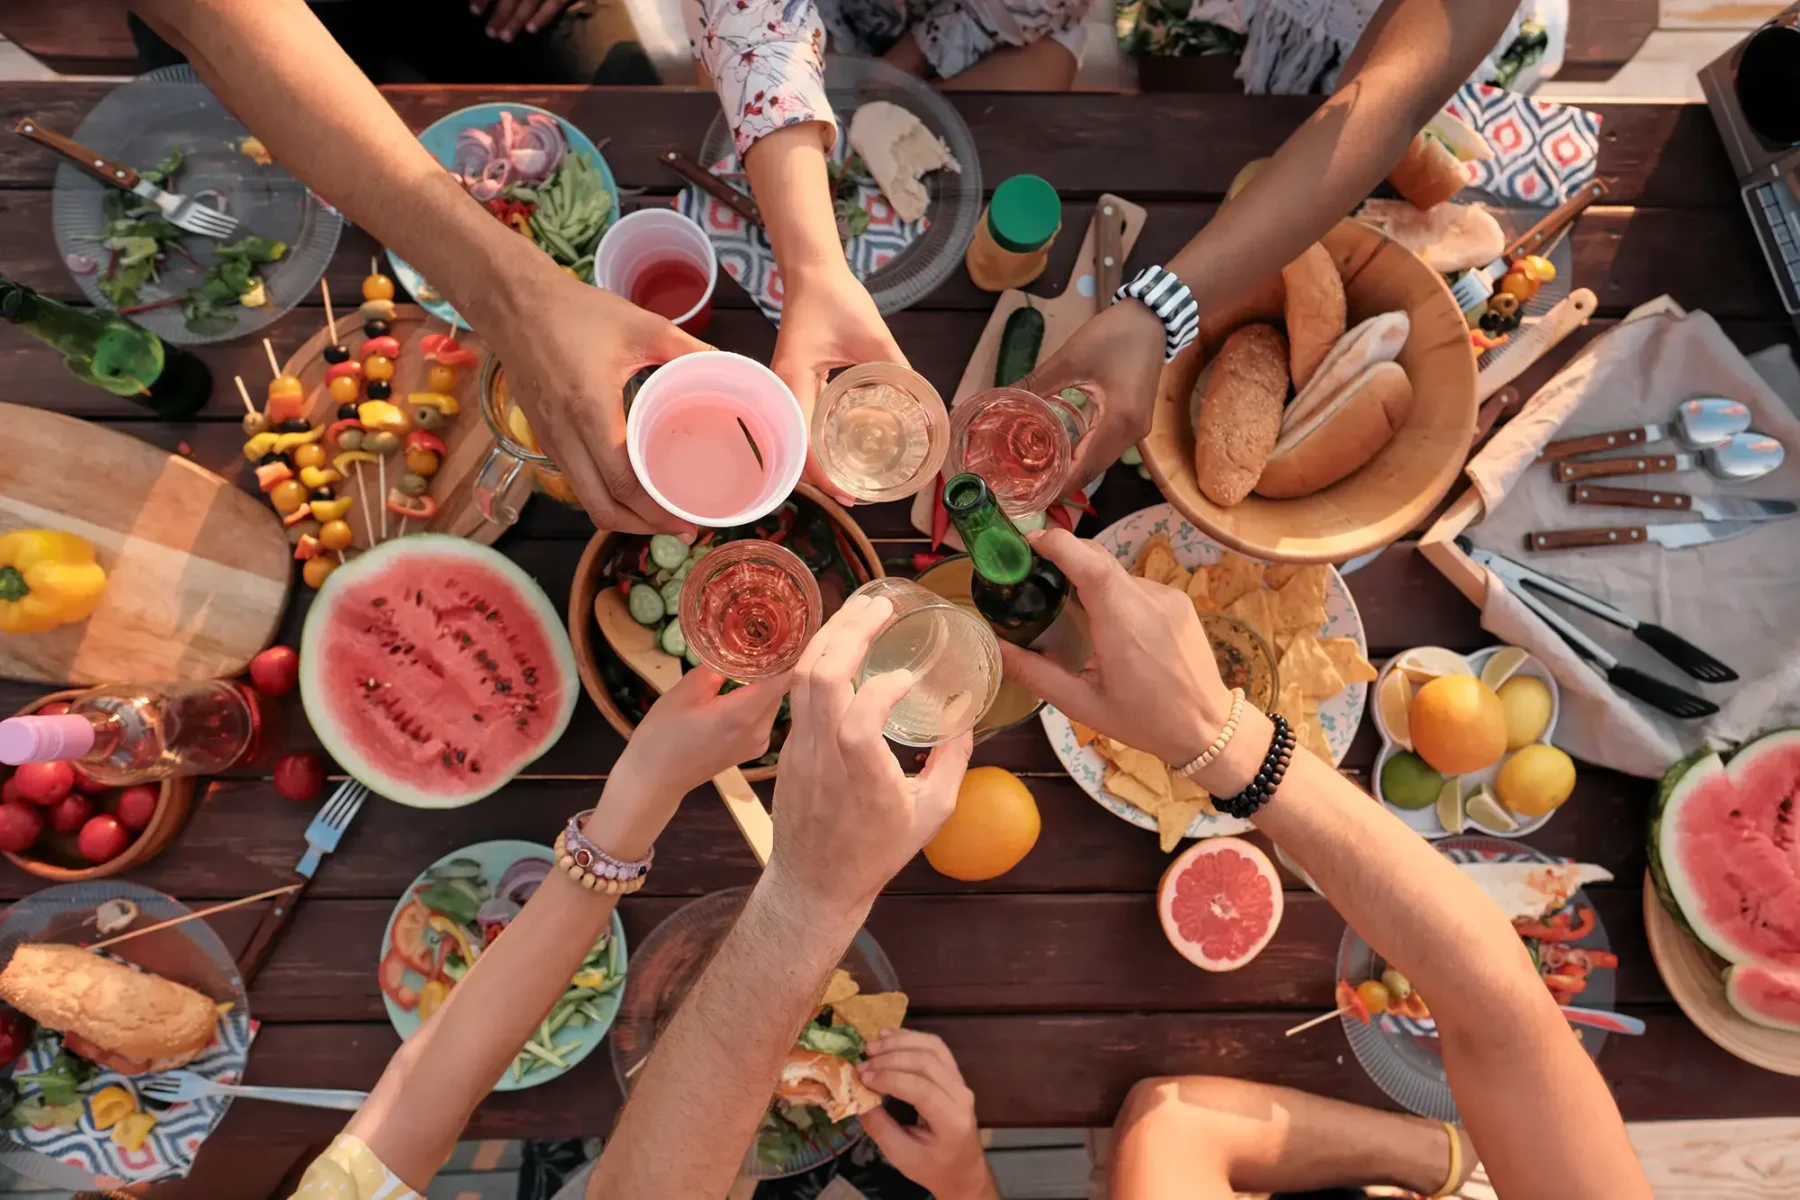 Table of food with group of people holding up their drinks in celebration